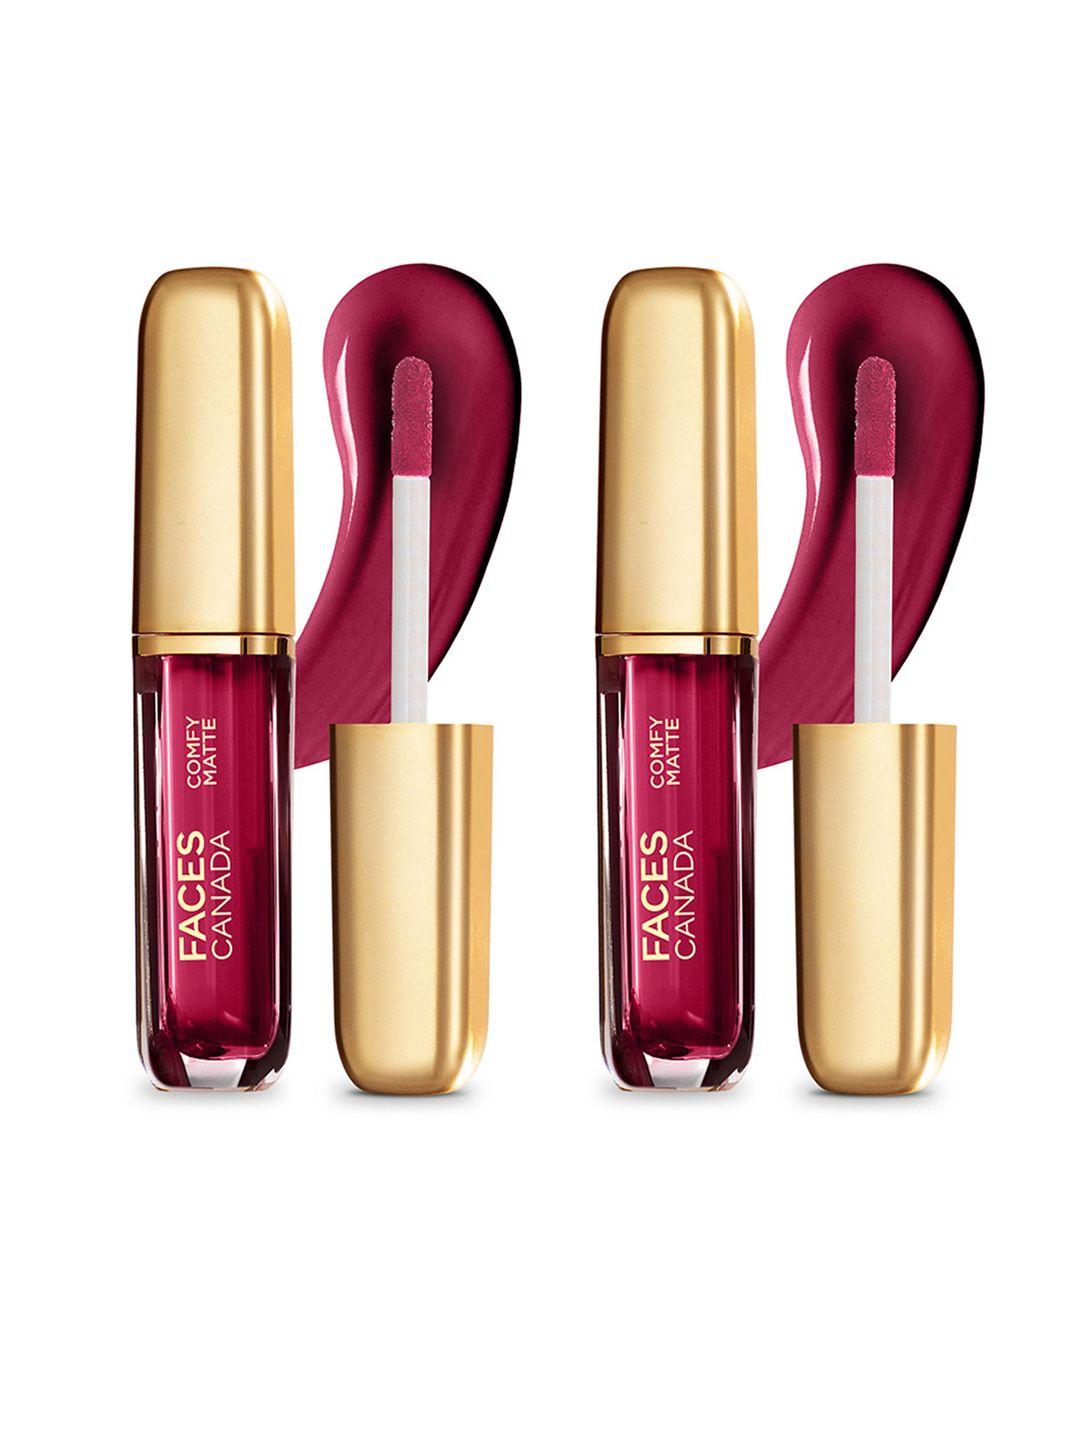 faces canada set of 2 comfy matte no-dryness liquid lipstick 3ml each - any day now 04